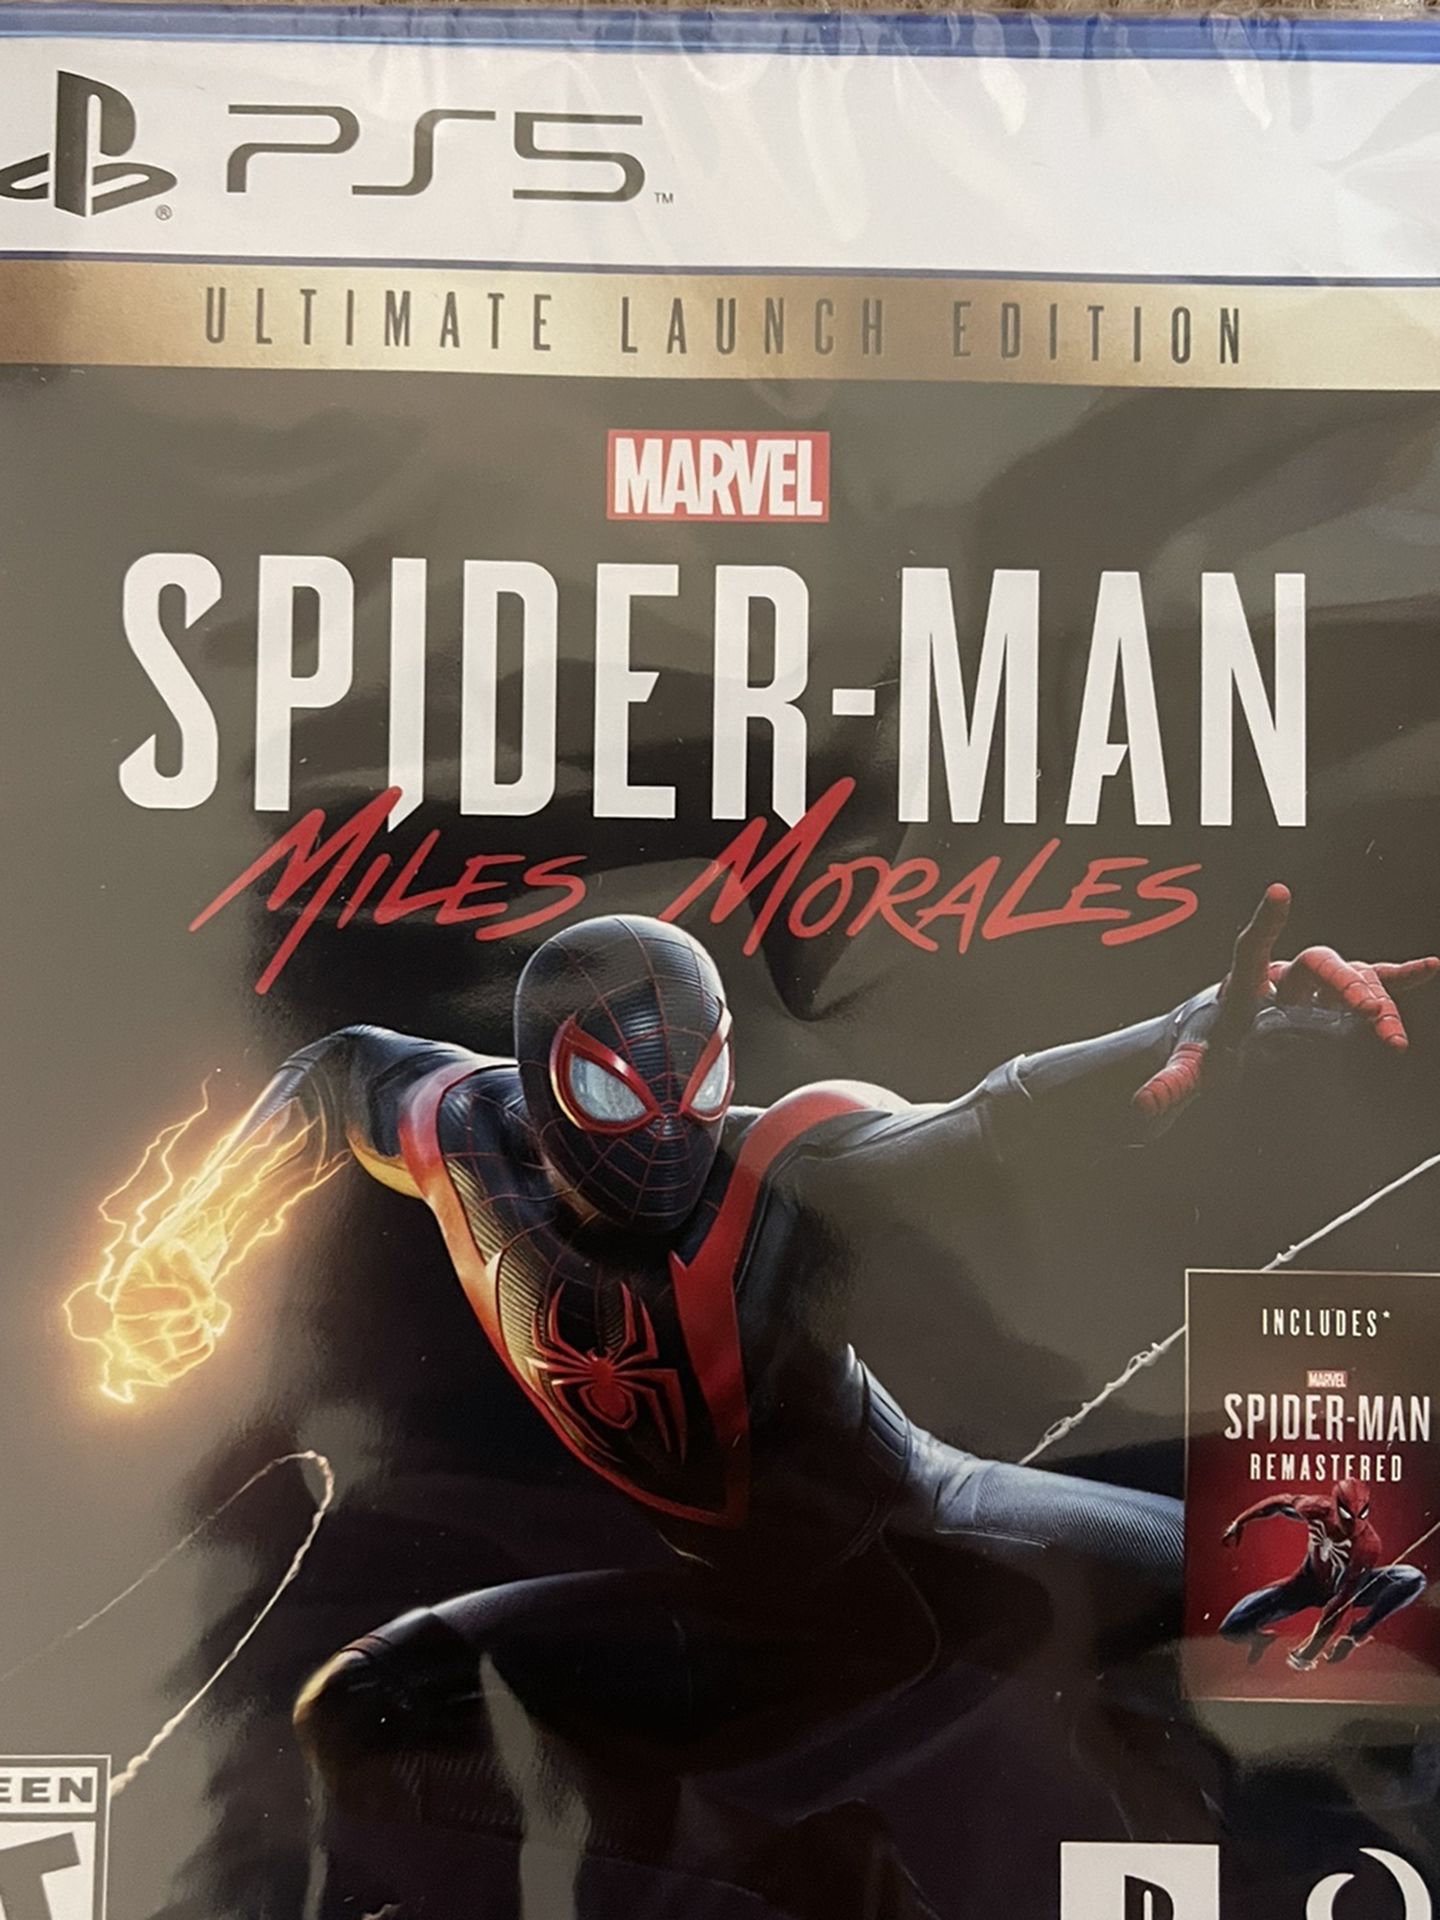 PS5 Spiderman Ultimate Launch Edition